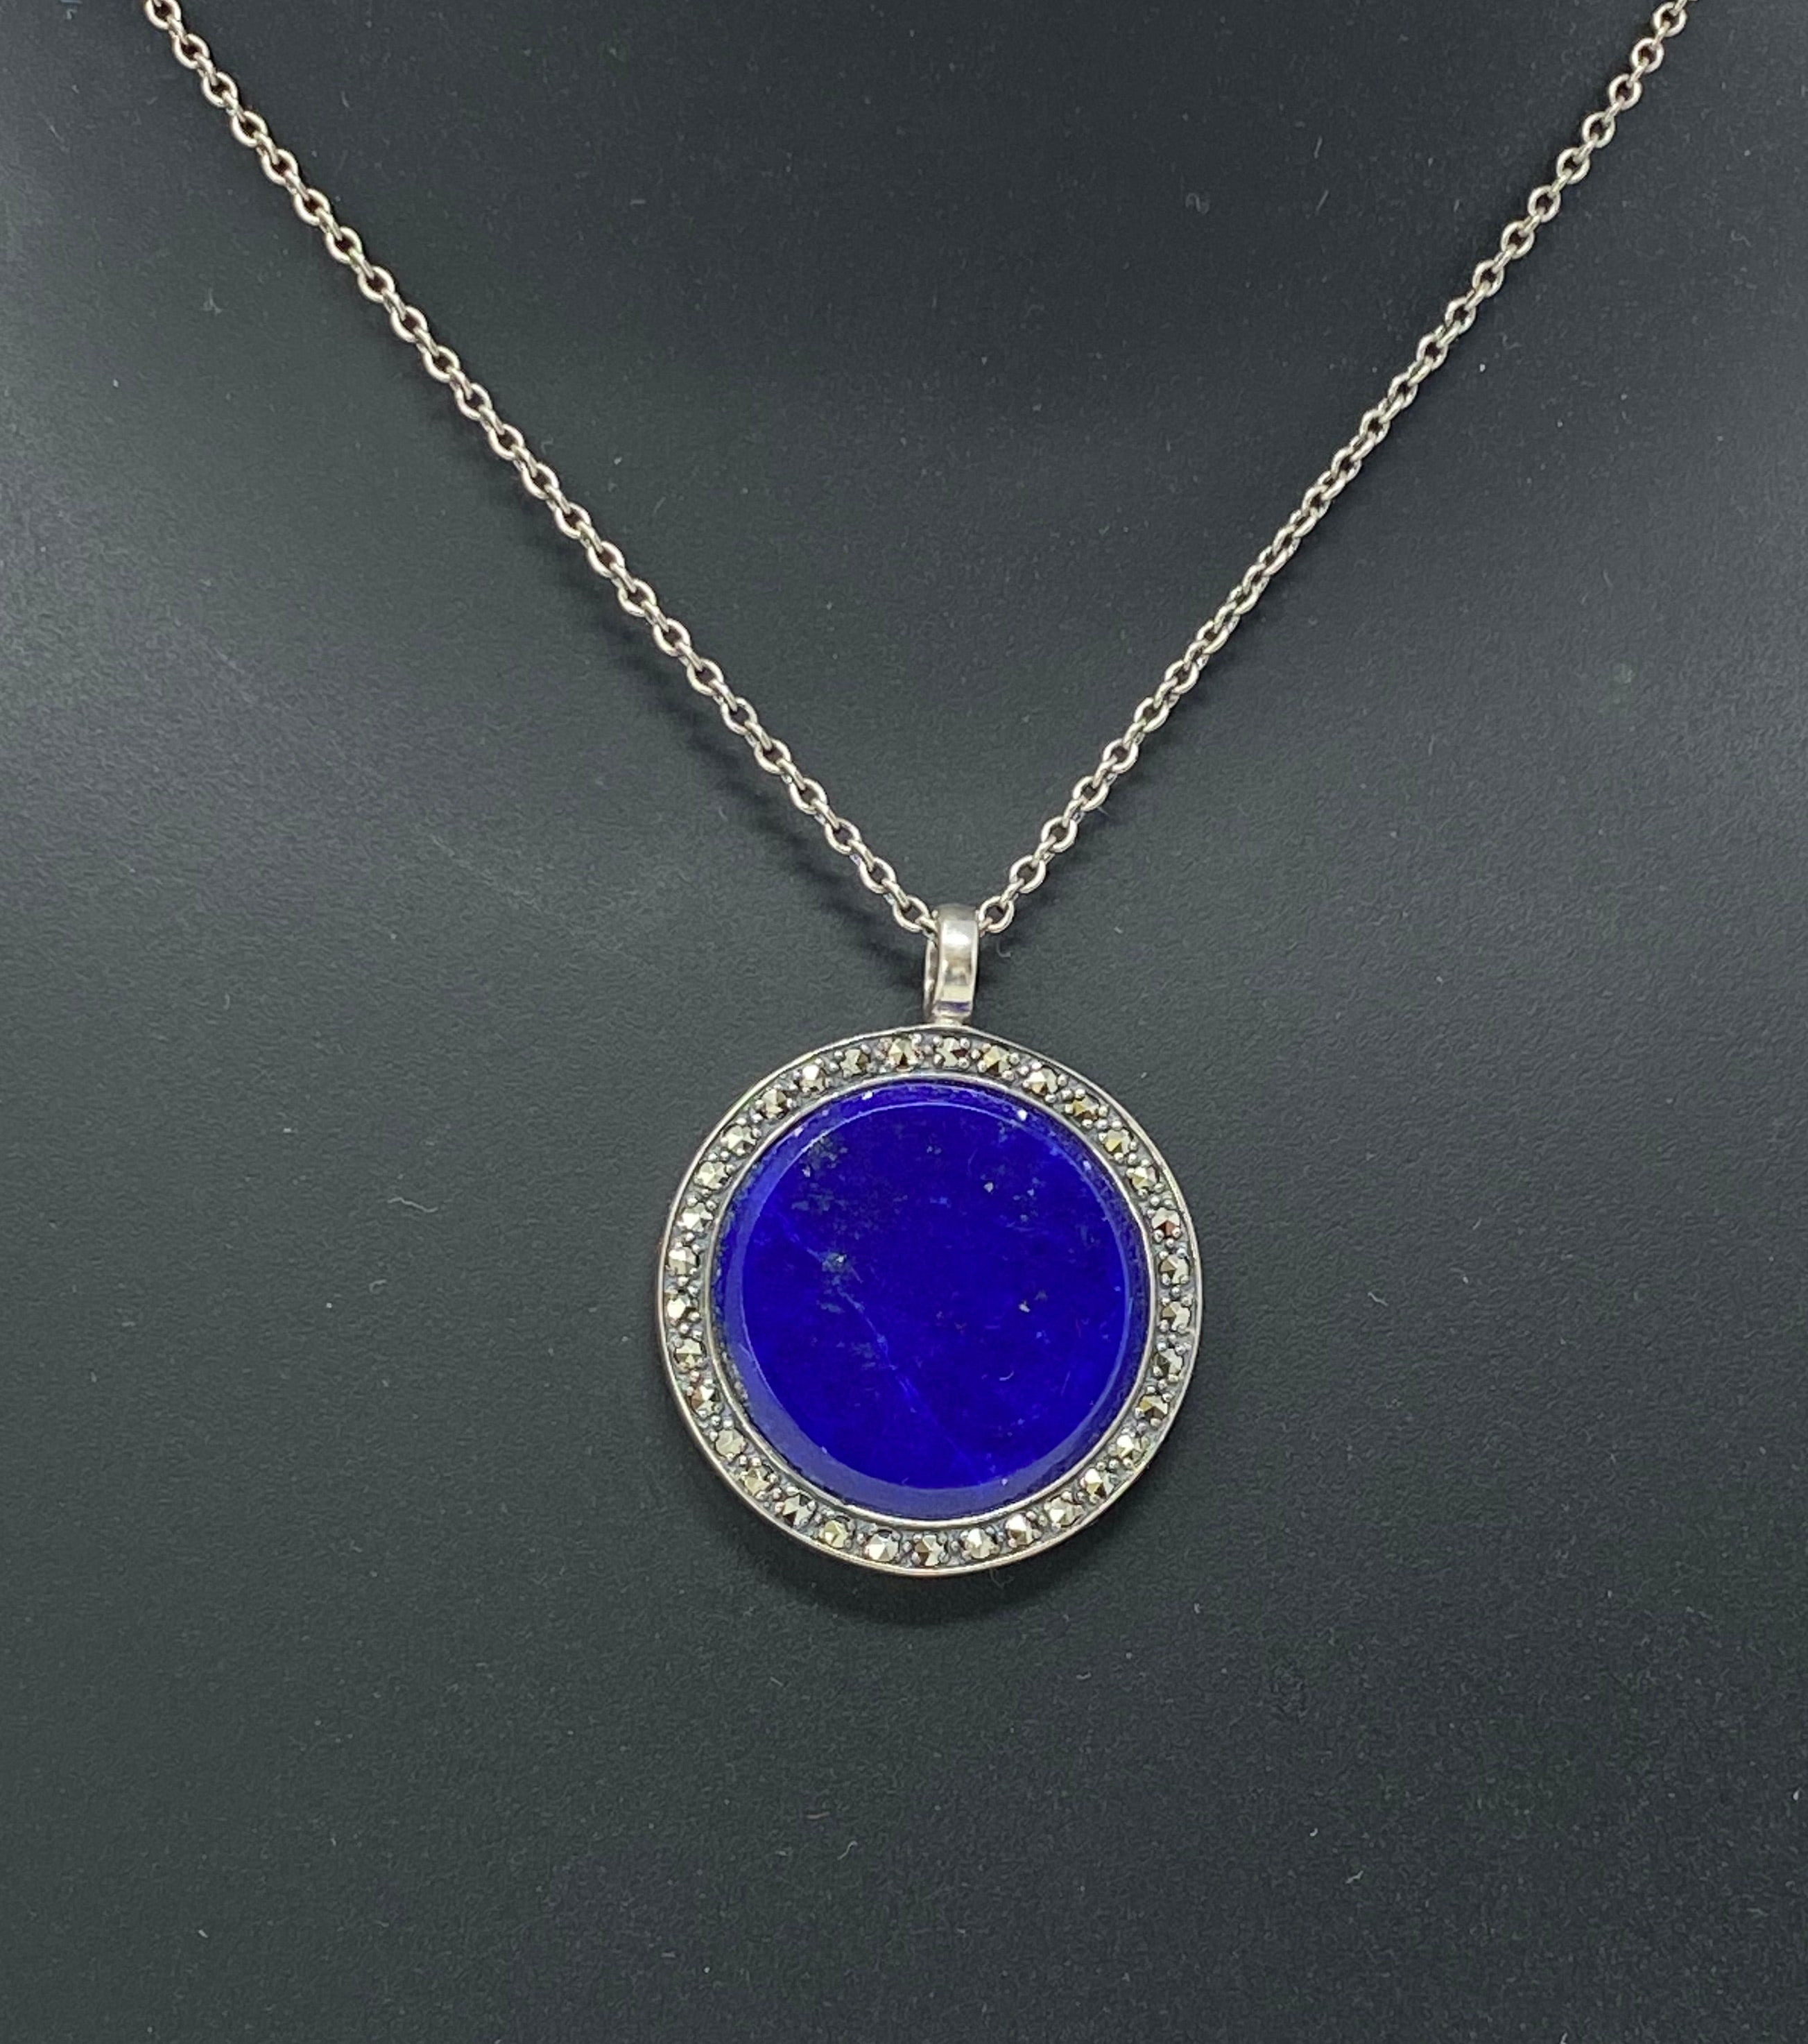 Silver, Marcasite and Lapis Lazuli Necklace